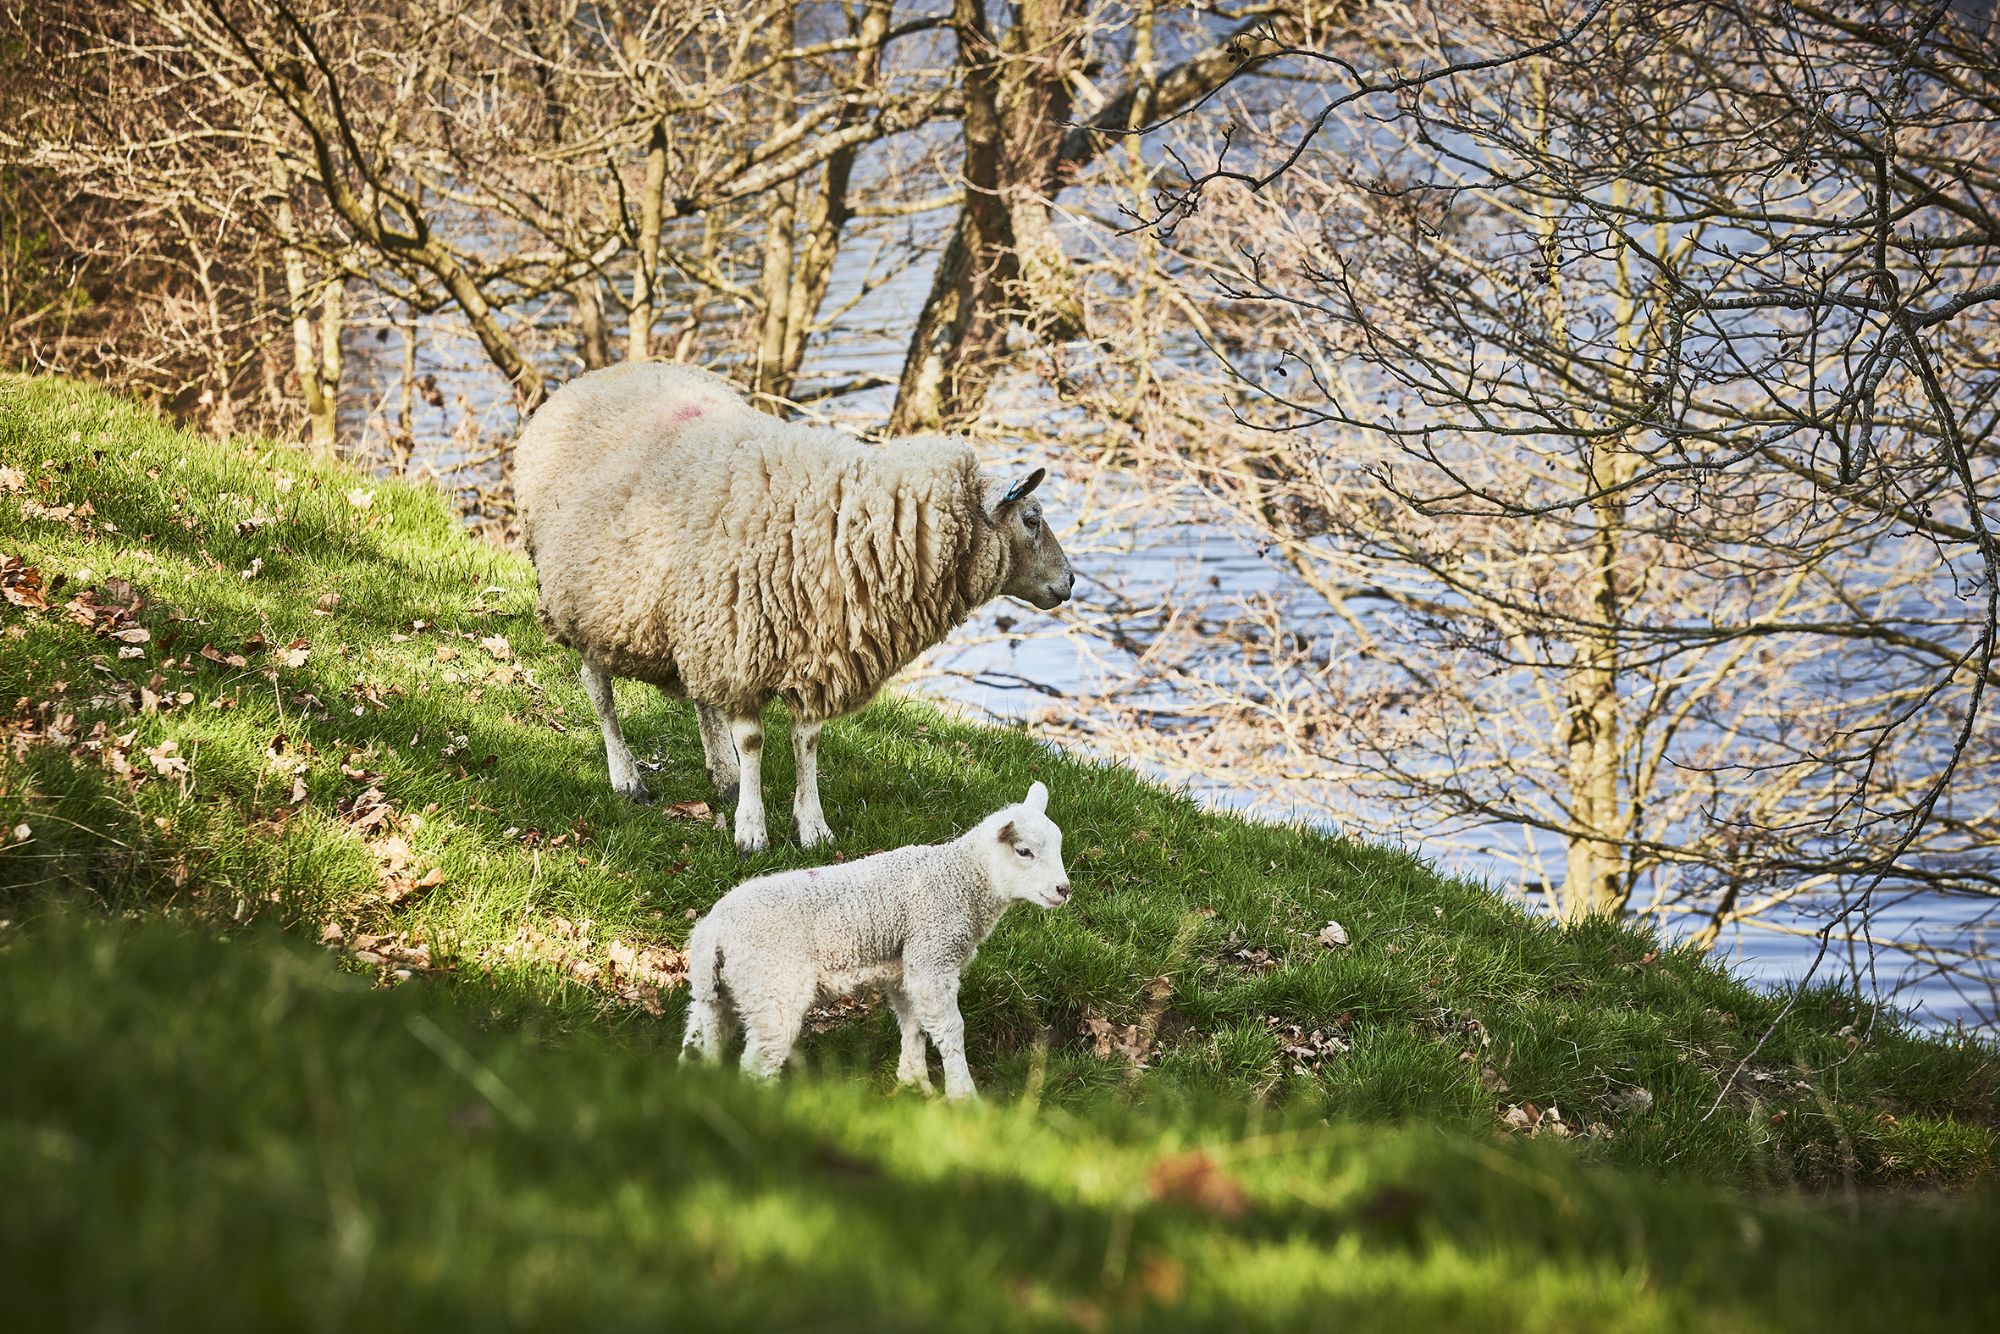 Sheep and lamb down by the river